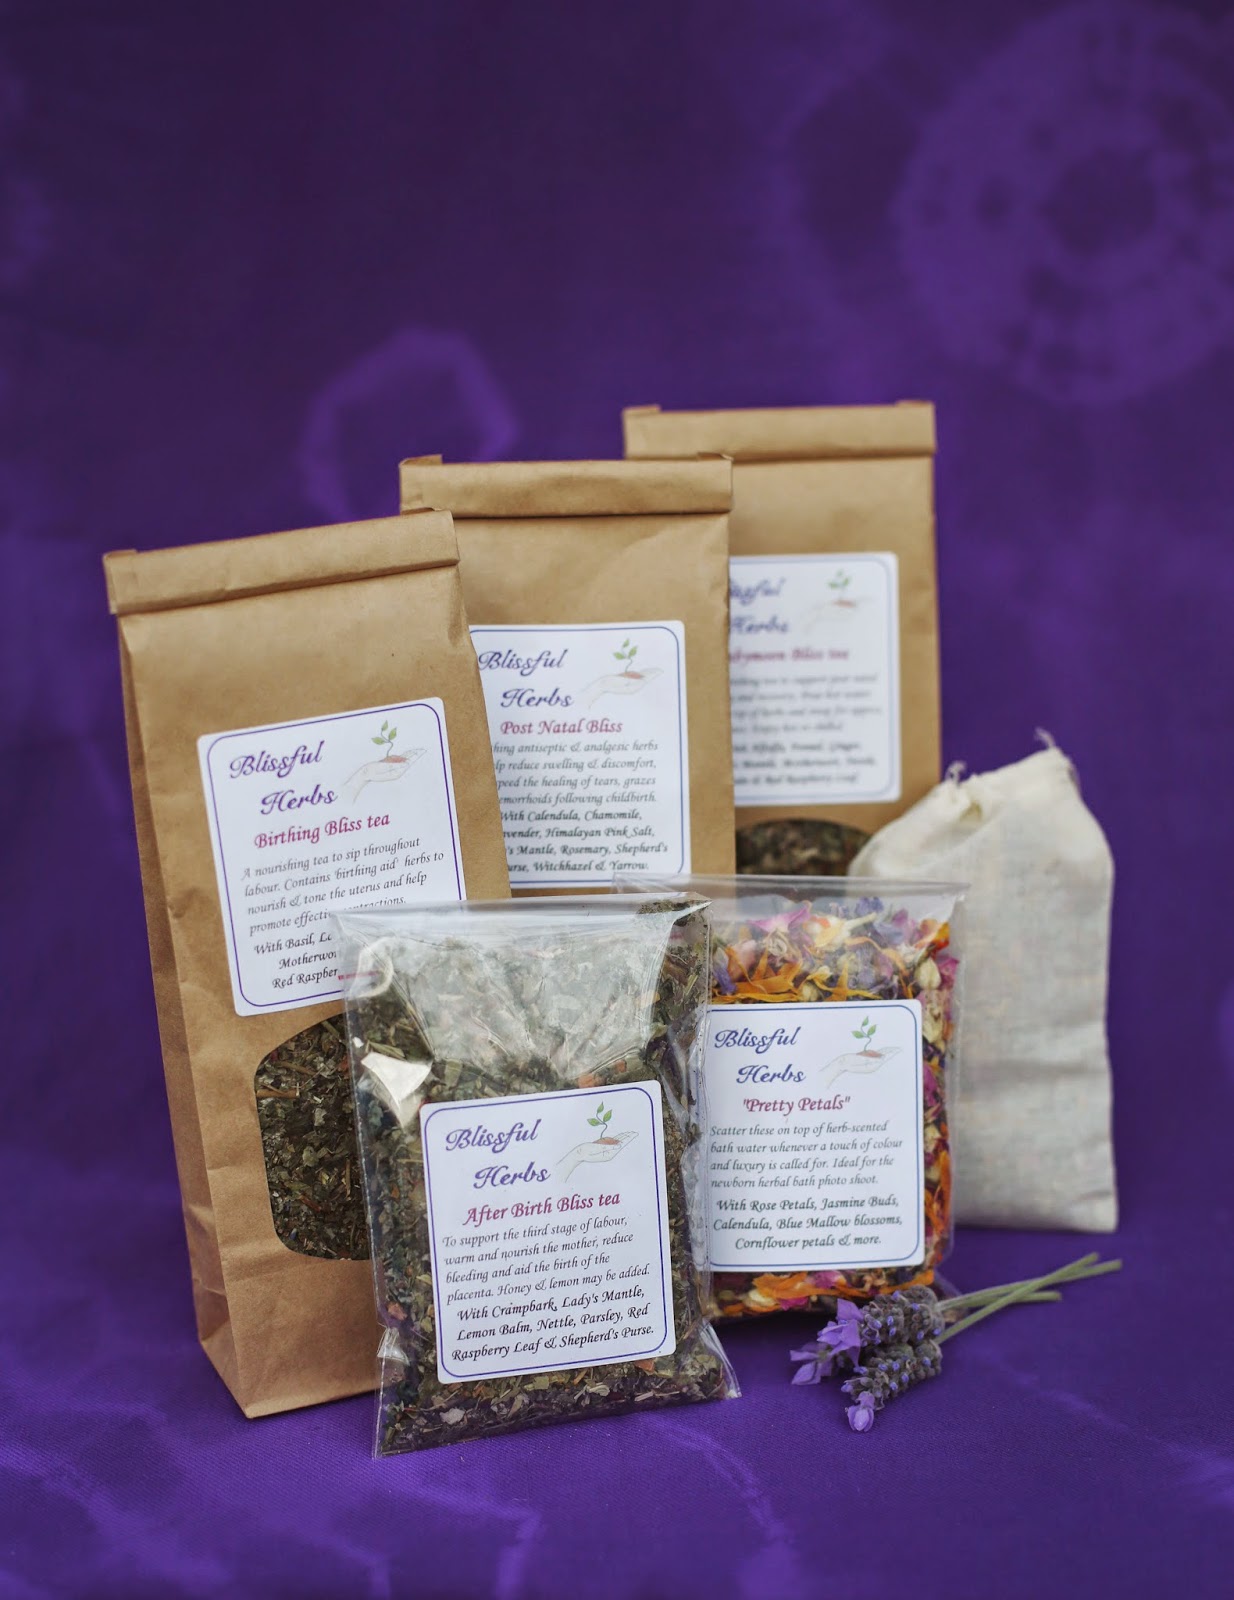 Melbourne Doula: List of Blissful Herbs products